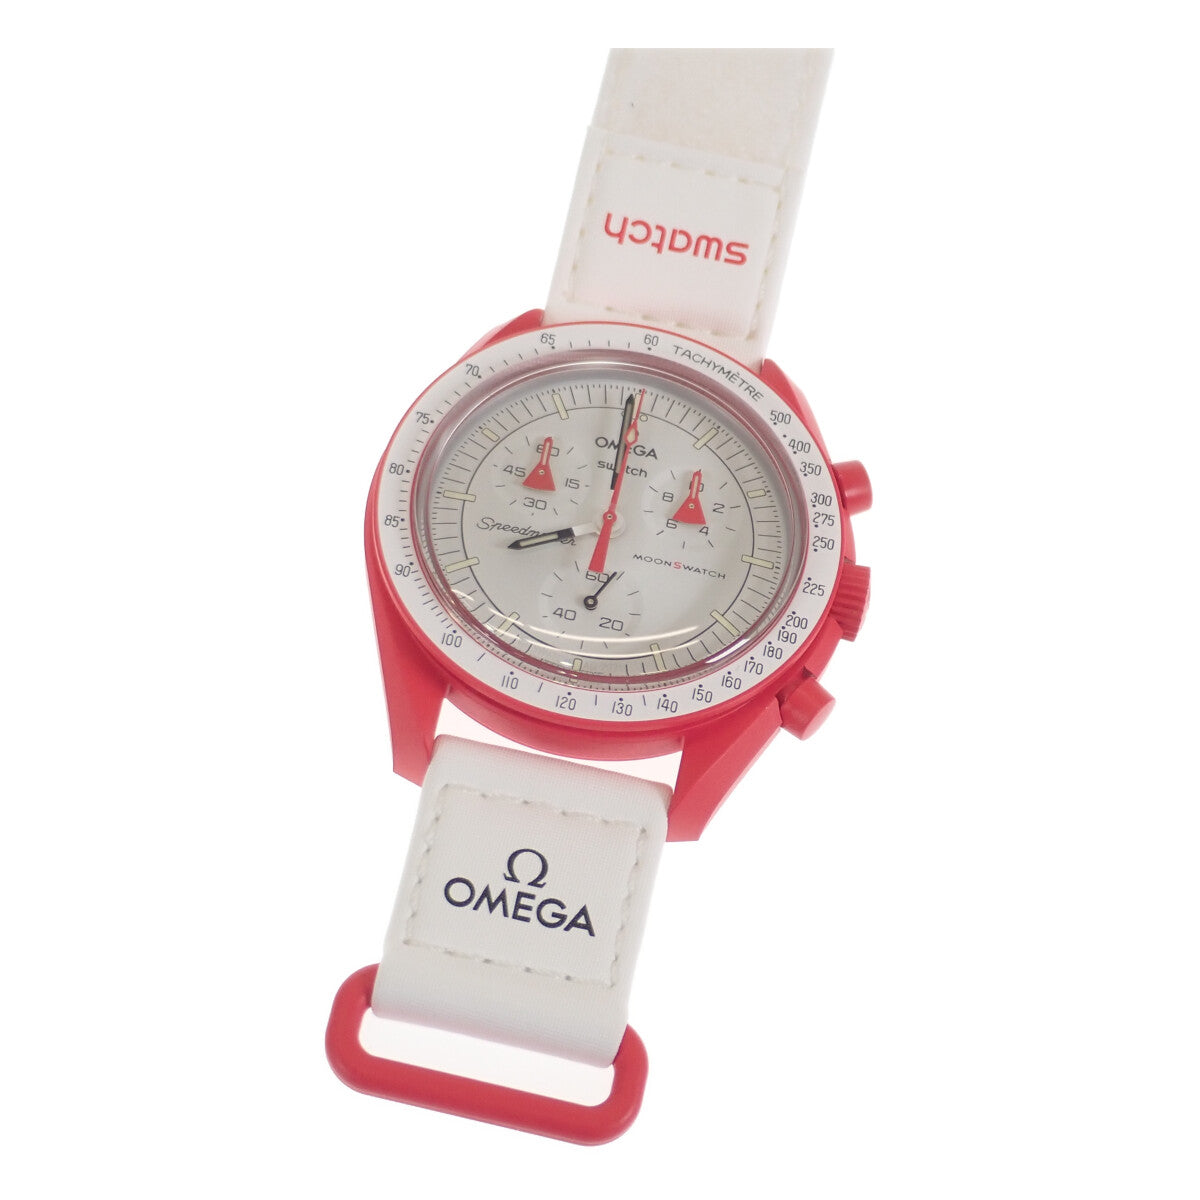 Omega X Swatch Mission to Mars Red Ceramic Watch for Men